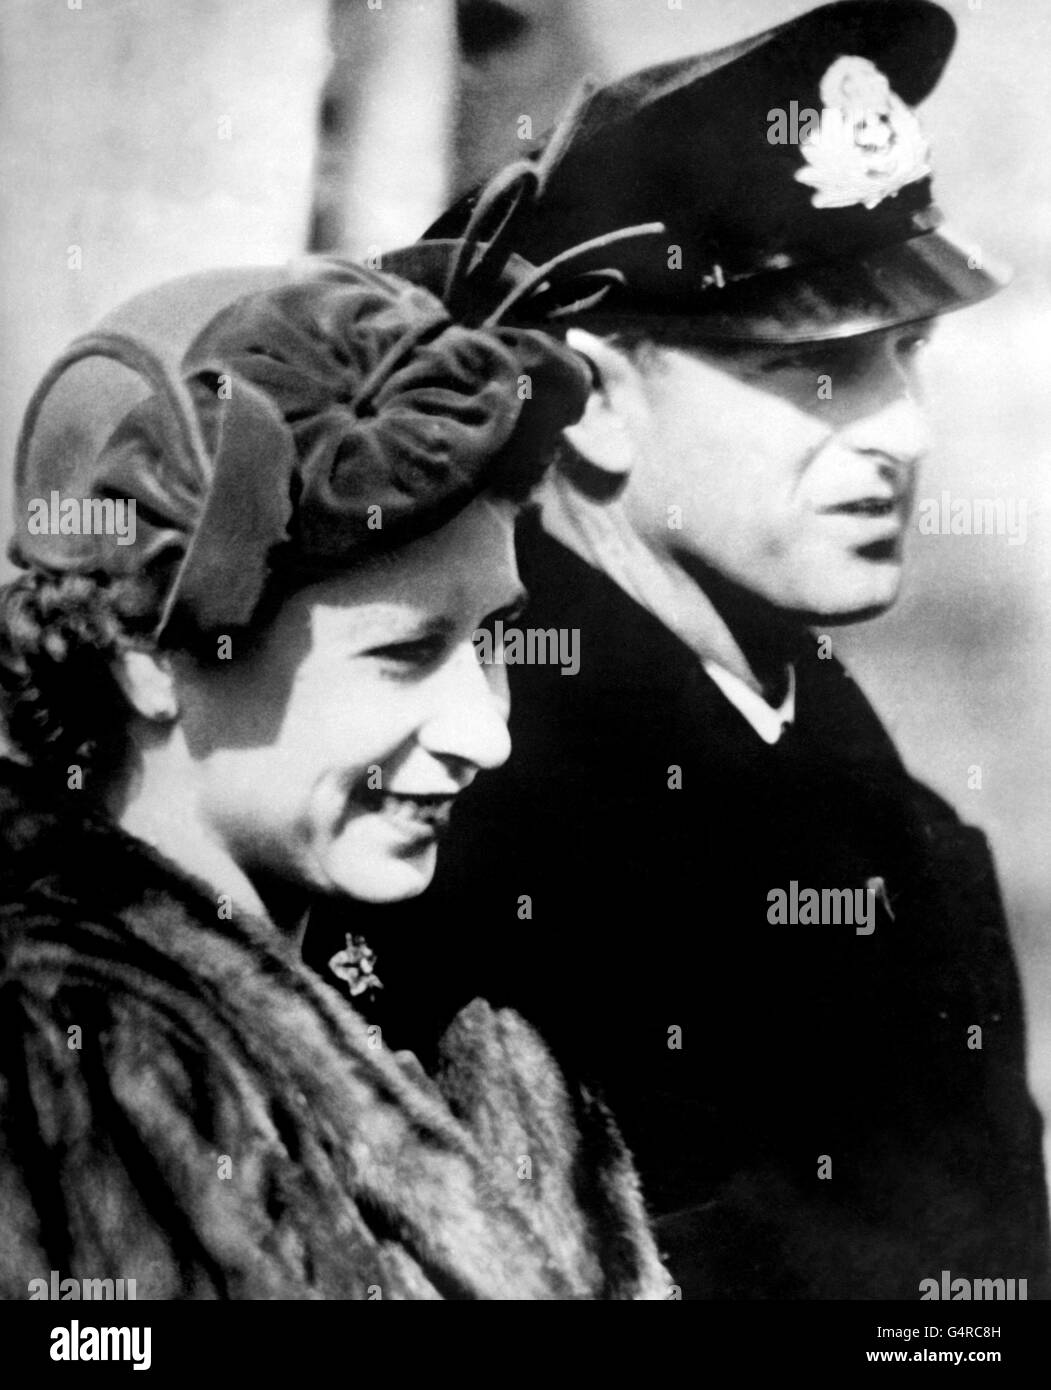 Princess Elizabeth and the Duke of Edinburgh shown as they arrived in Winnipeg, Manitoba during the Royal Tour of Canada. Stock Photo